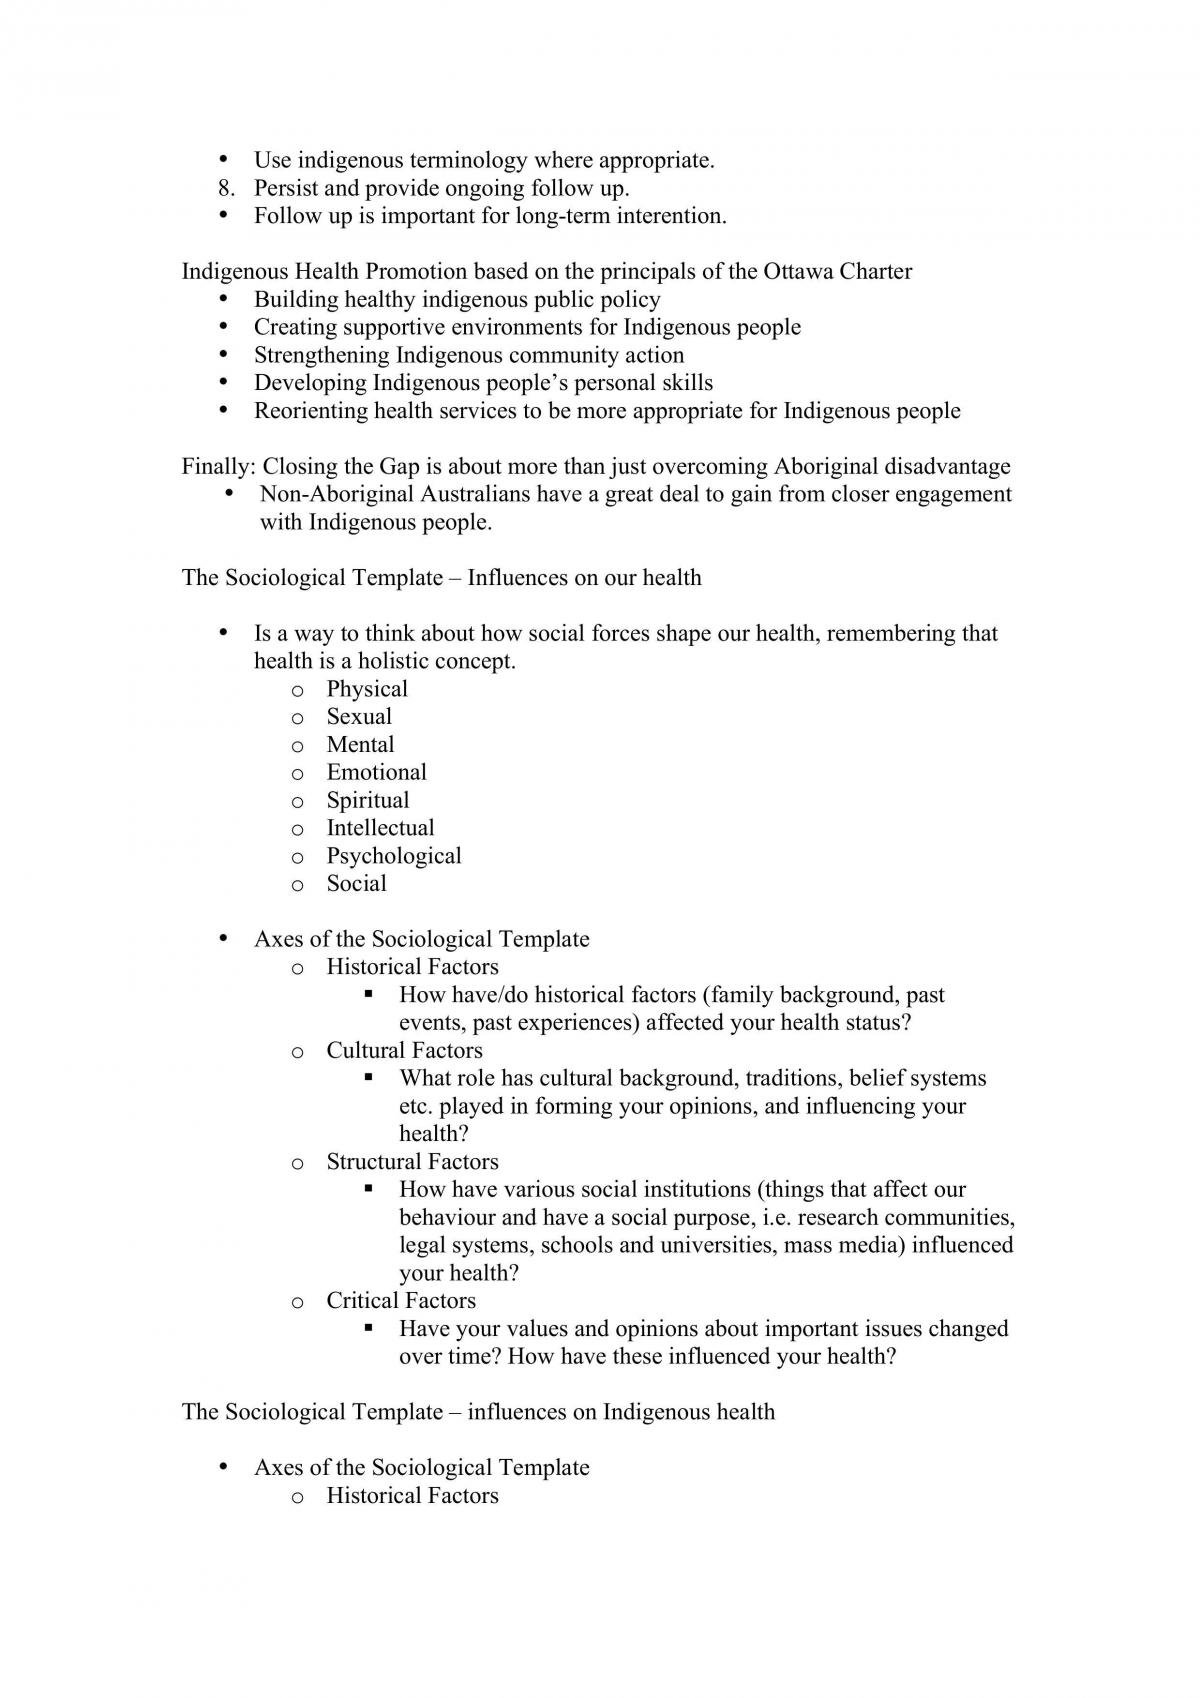 Understanding Health Notes - Page 33